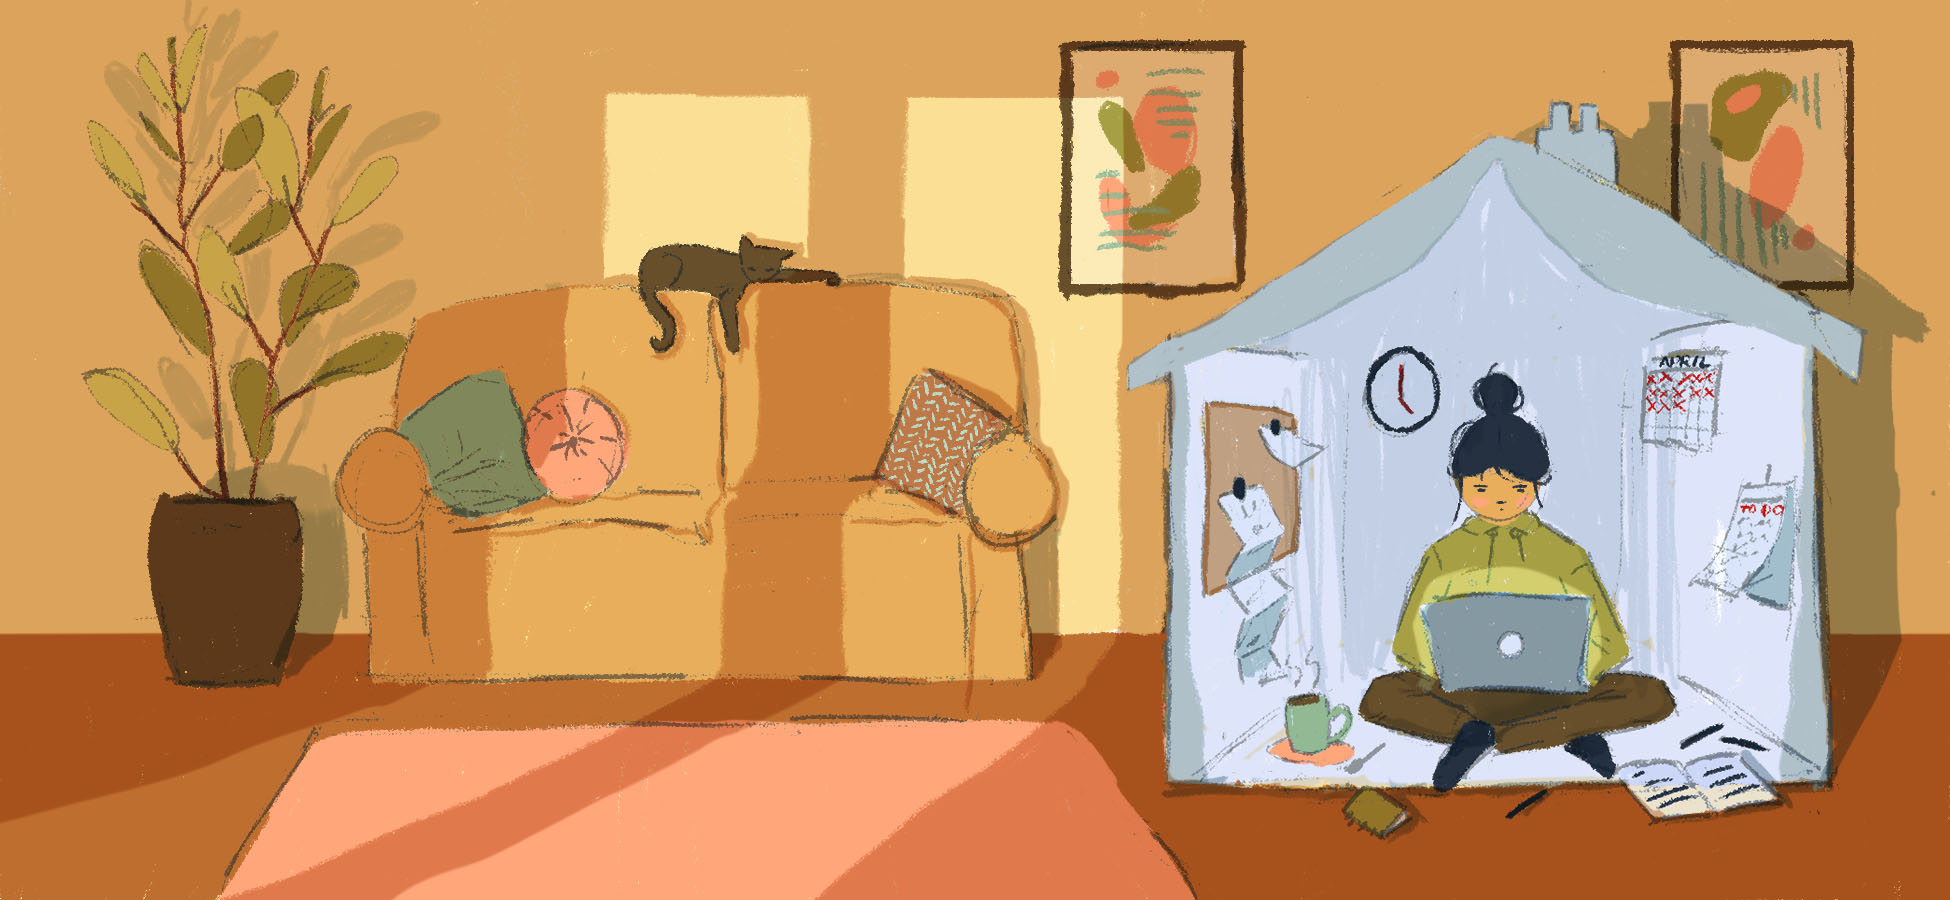 Illustration created for an editorial module brief on an article by Paula Akpan, "Advice – Working from home? Here are five ways to maintain productivity and counteract loneliness".